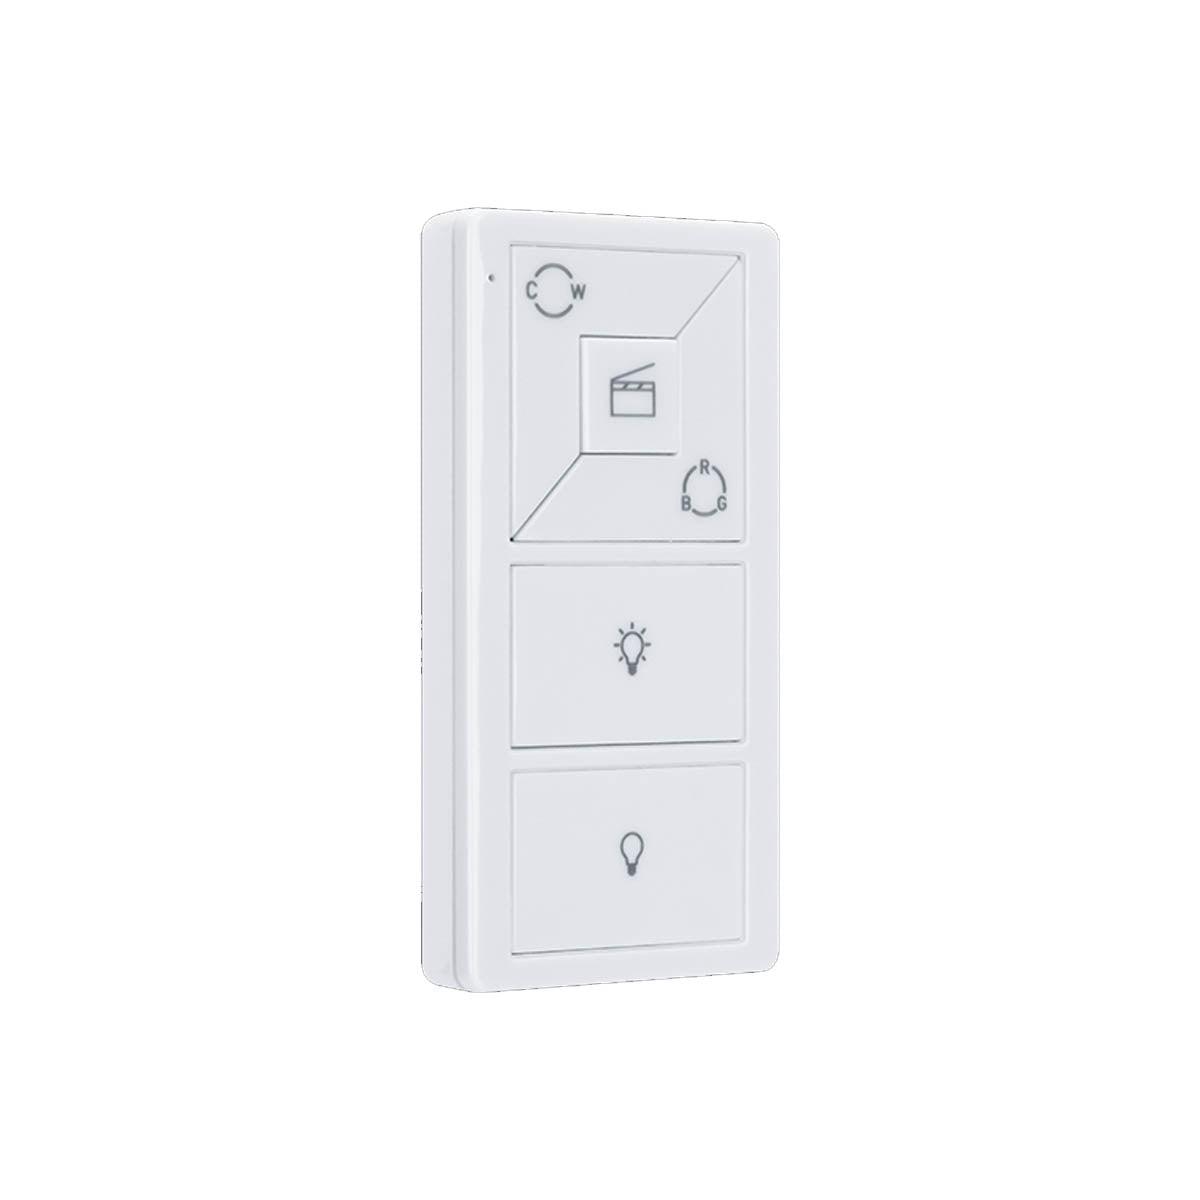 Spektrum Wireless Smart Switch Controller (Wall-plate Not Included) - Bees Lighting